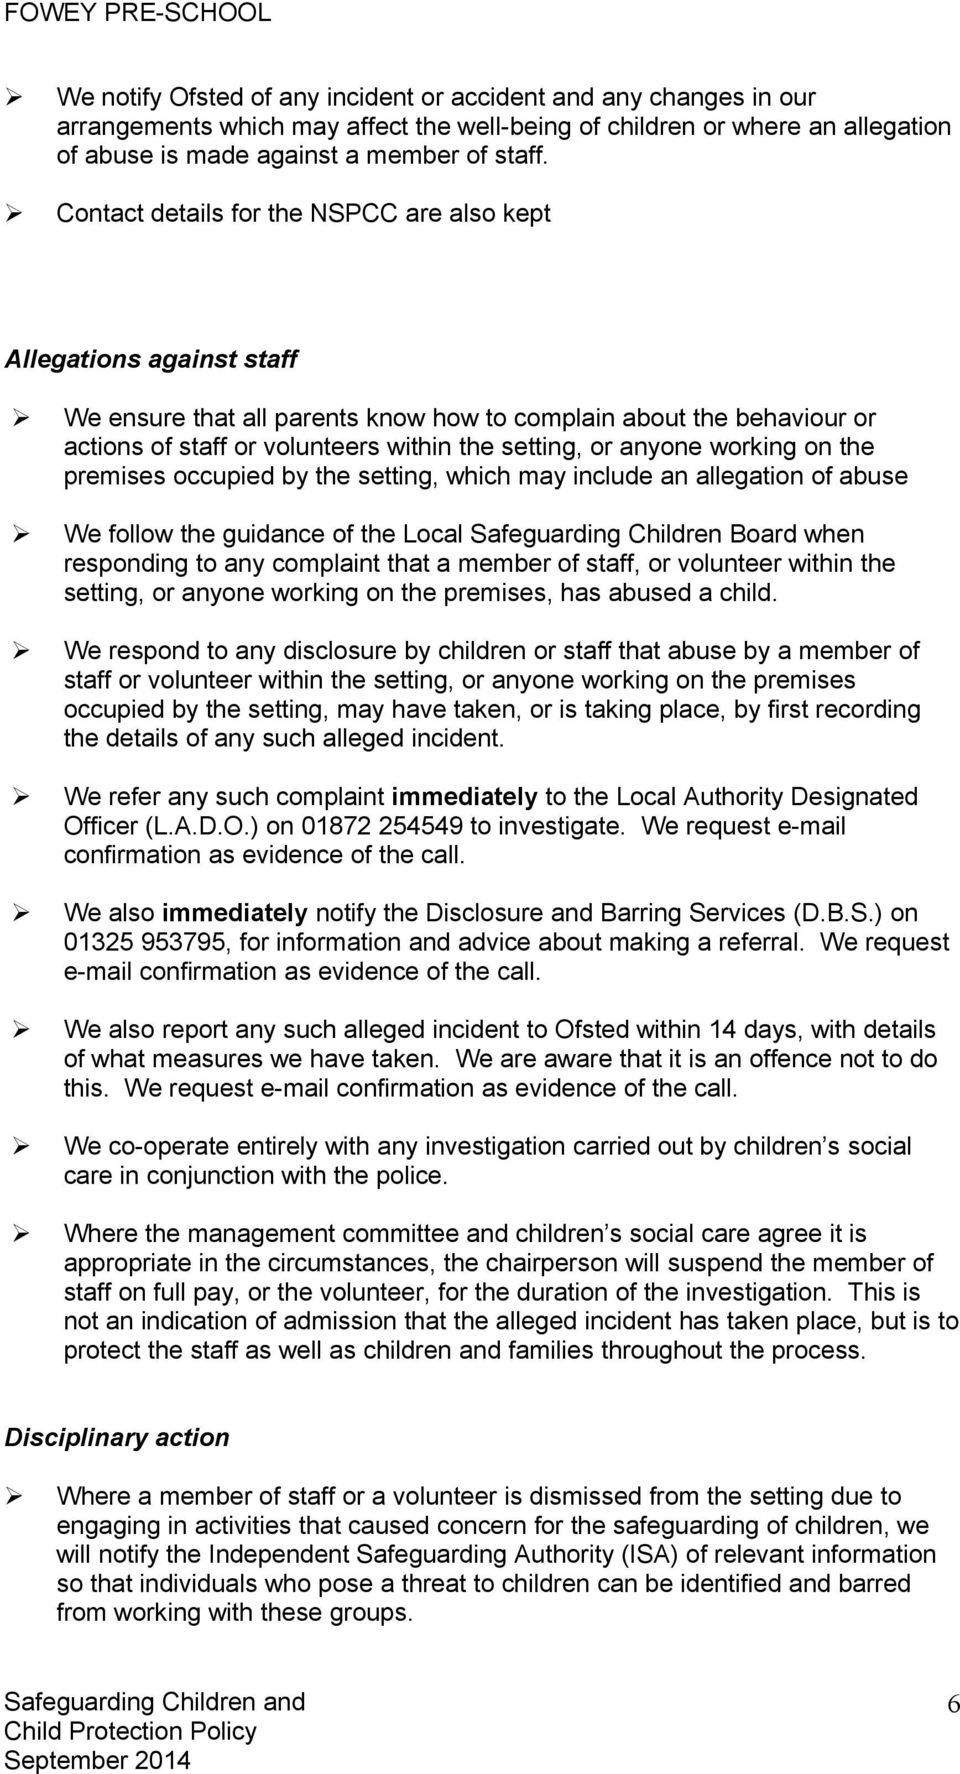 anyone working on the premises occupied by the setting, which may include an allegation of abuse We follow the guidance of the Local Safeguarding Children Board when responding to any complaint that